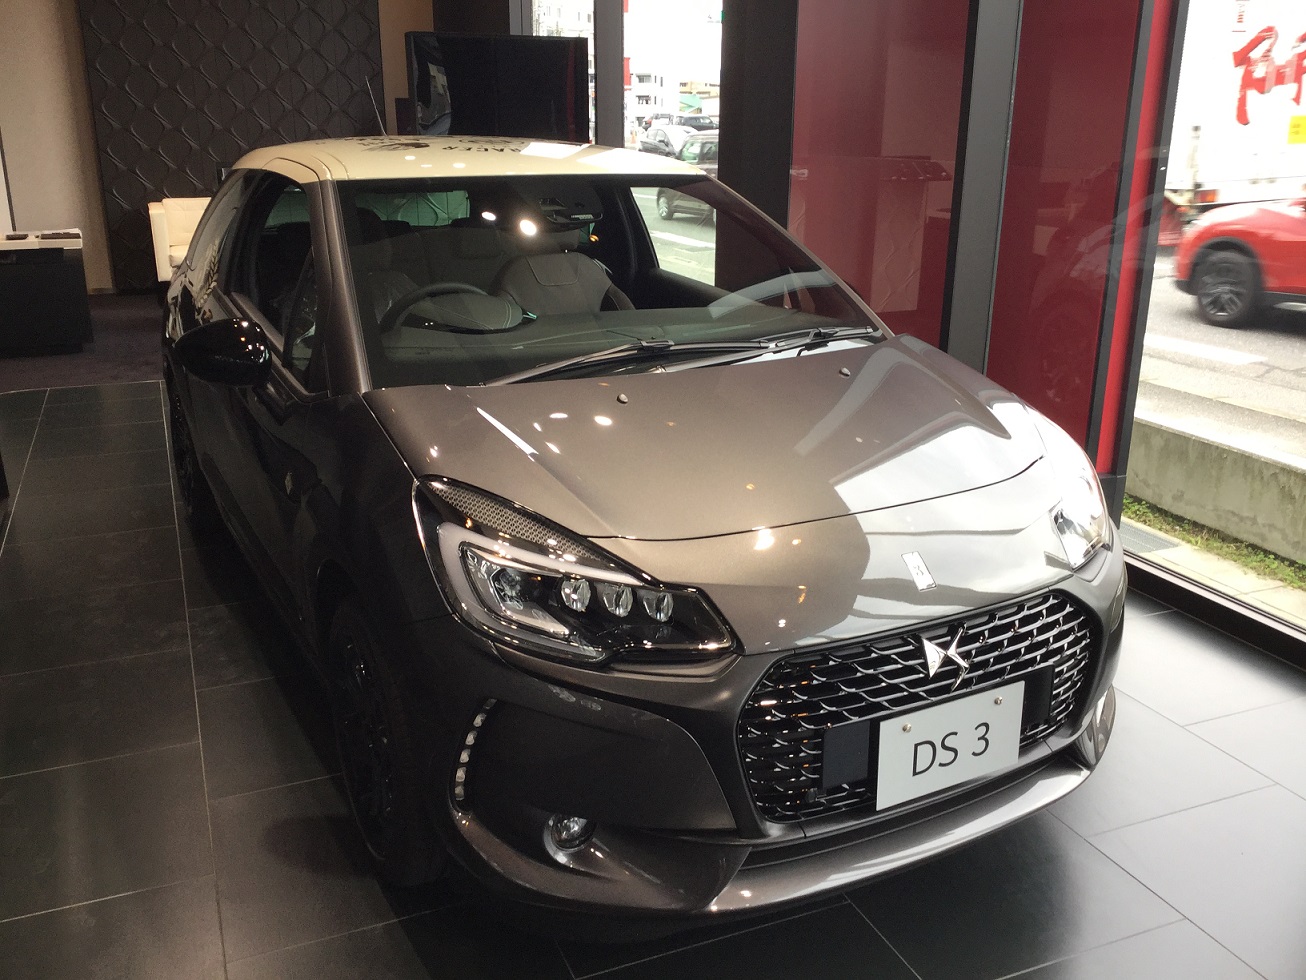 DS 3 CAFE RACER 展示しております　♪♪